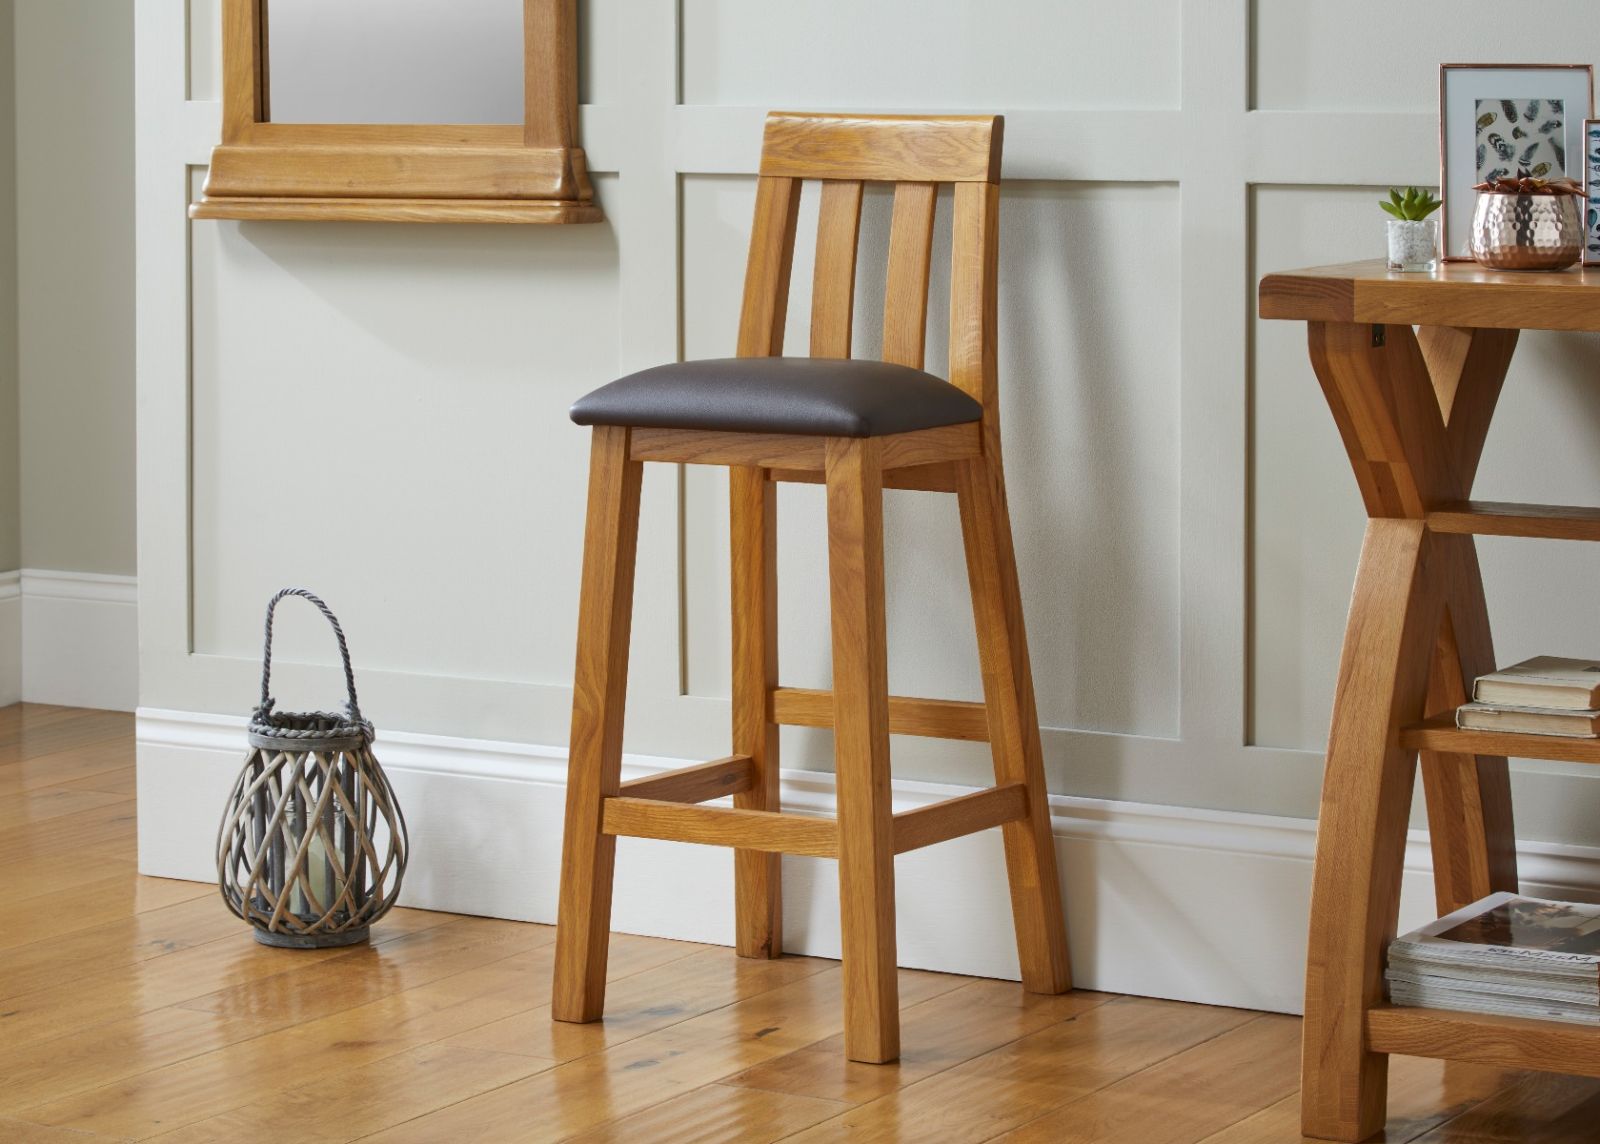 Billy Tall Oak Bar Stool with Brown Leather - 20% OFF WINTER SALE